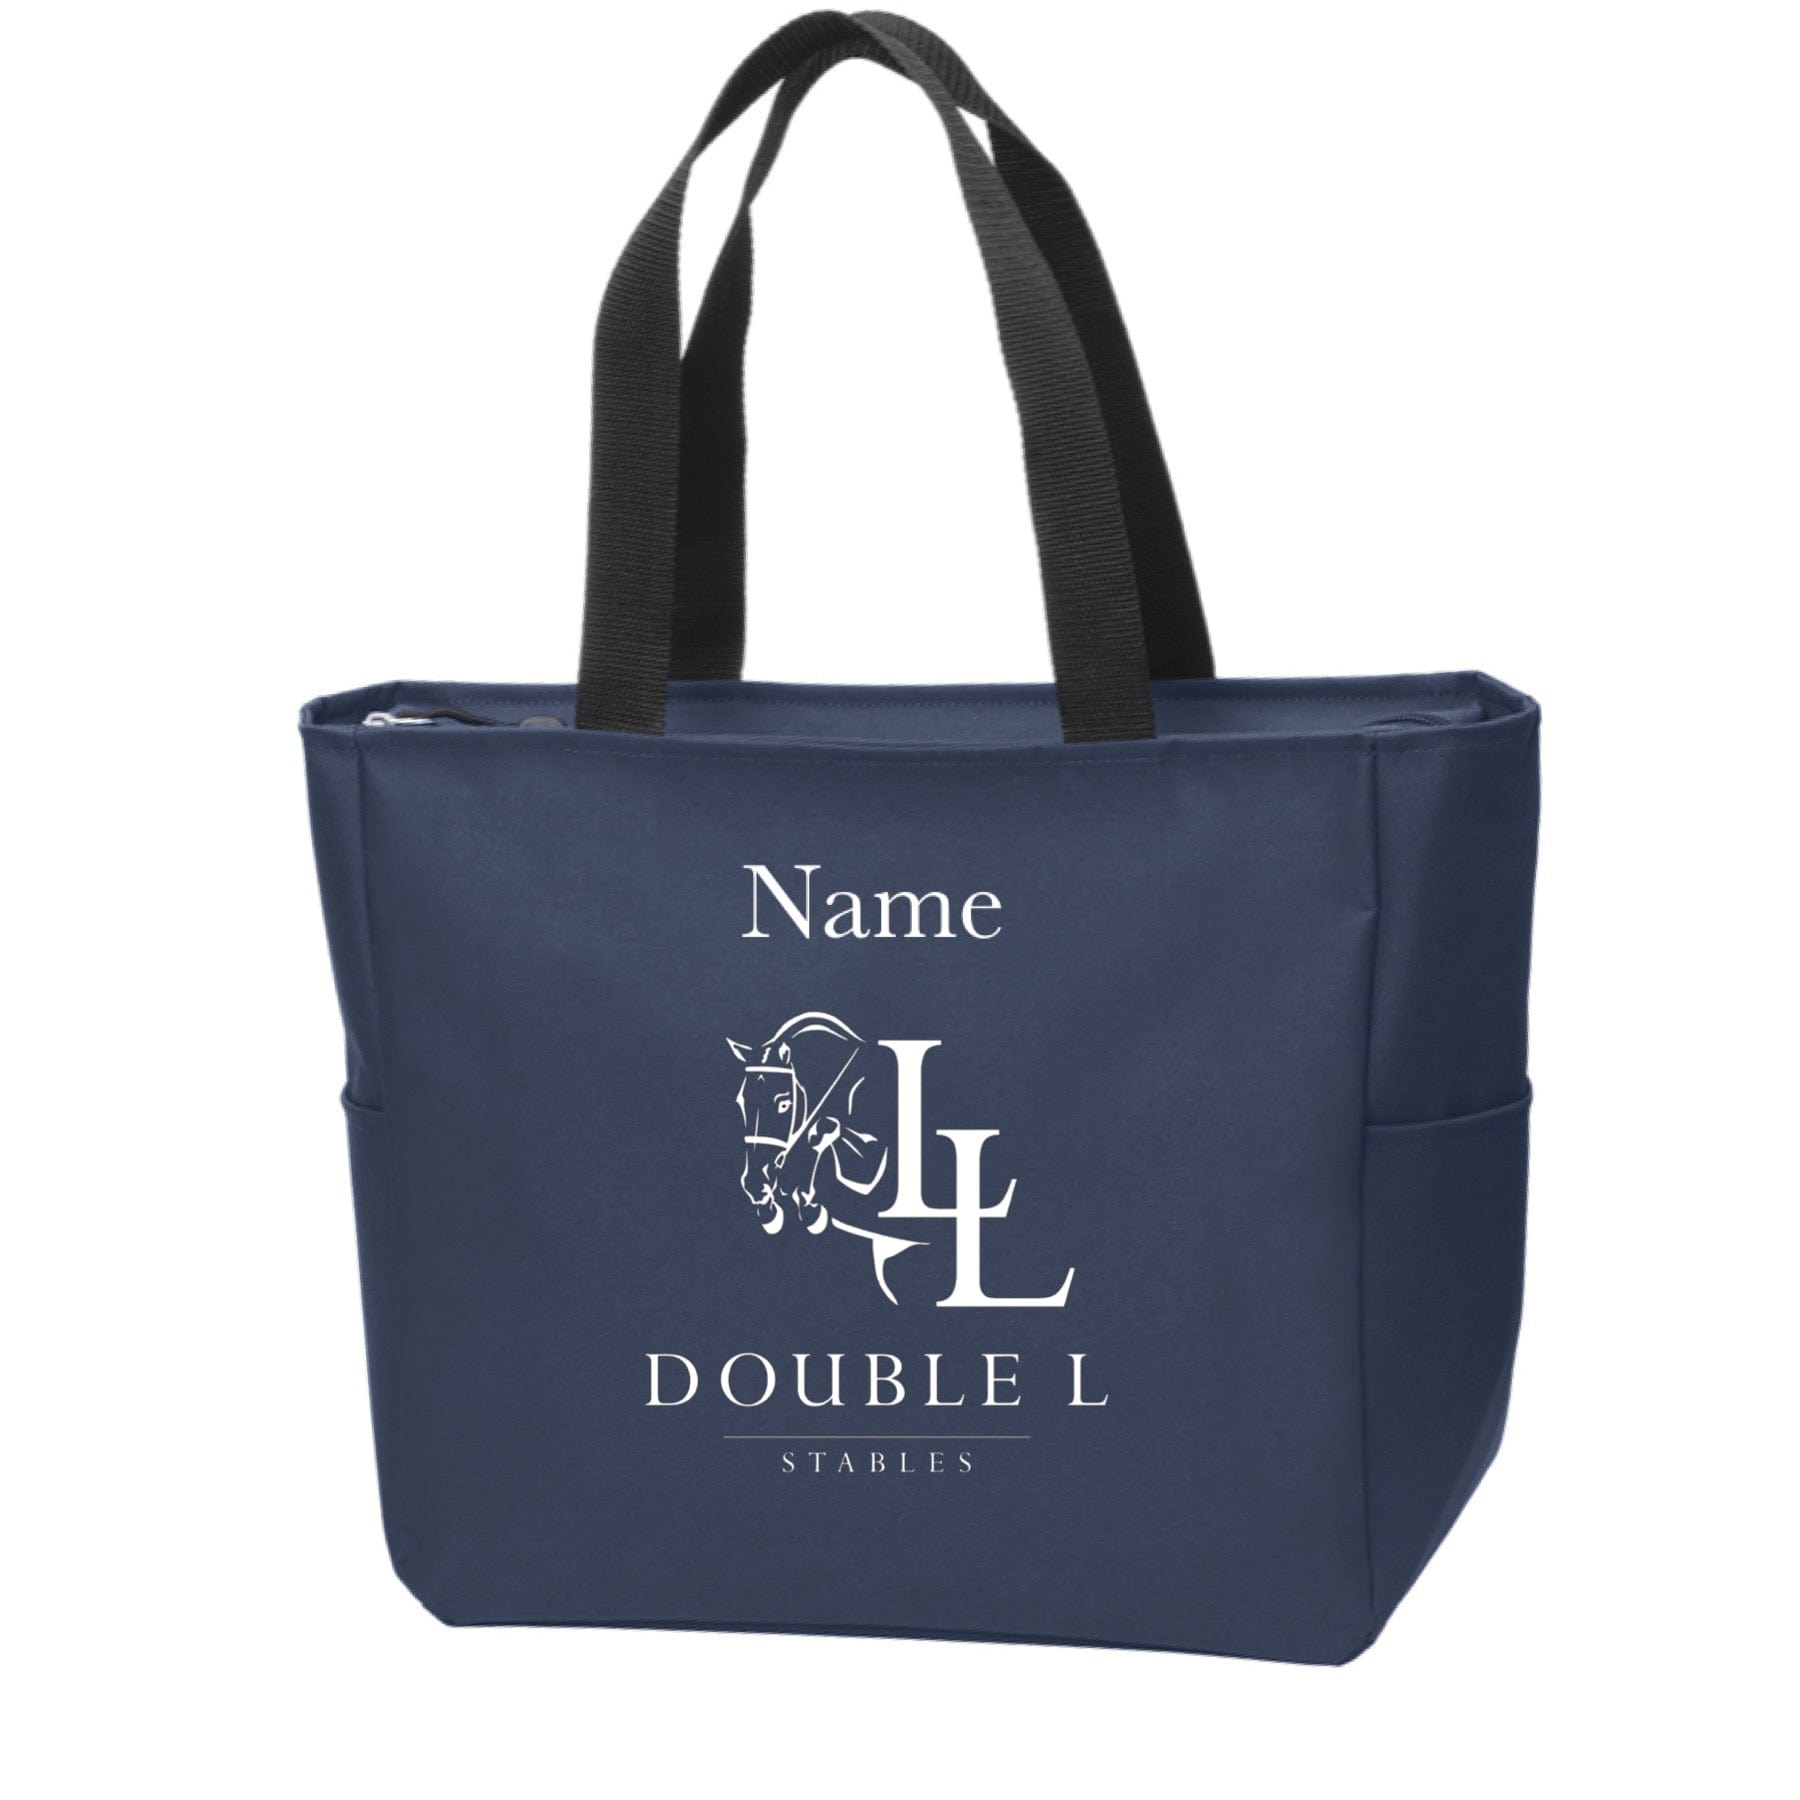 Equestrian Team Apparel Double L Stables Tote Bag equestrian team apparel online tack store mobile tack store custom farm apparel custom show stable clothing equestrian lifestyle horse show clothing riding clothes horses equestrian tack store